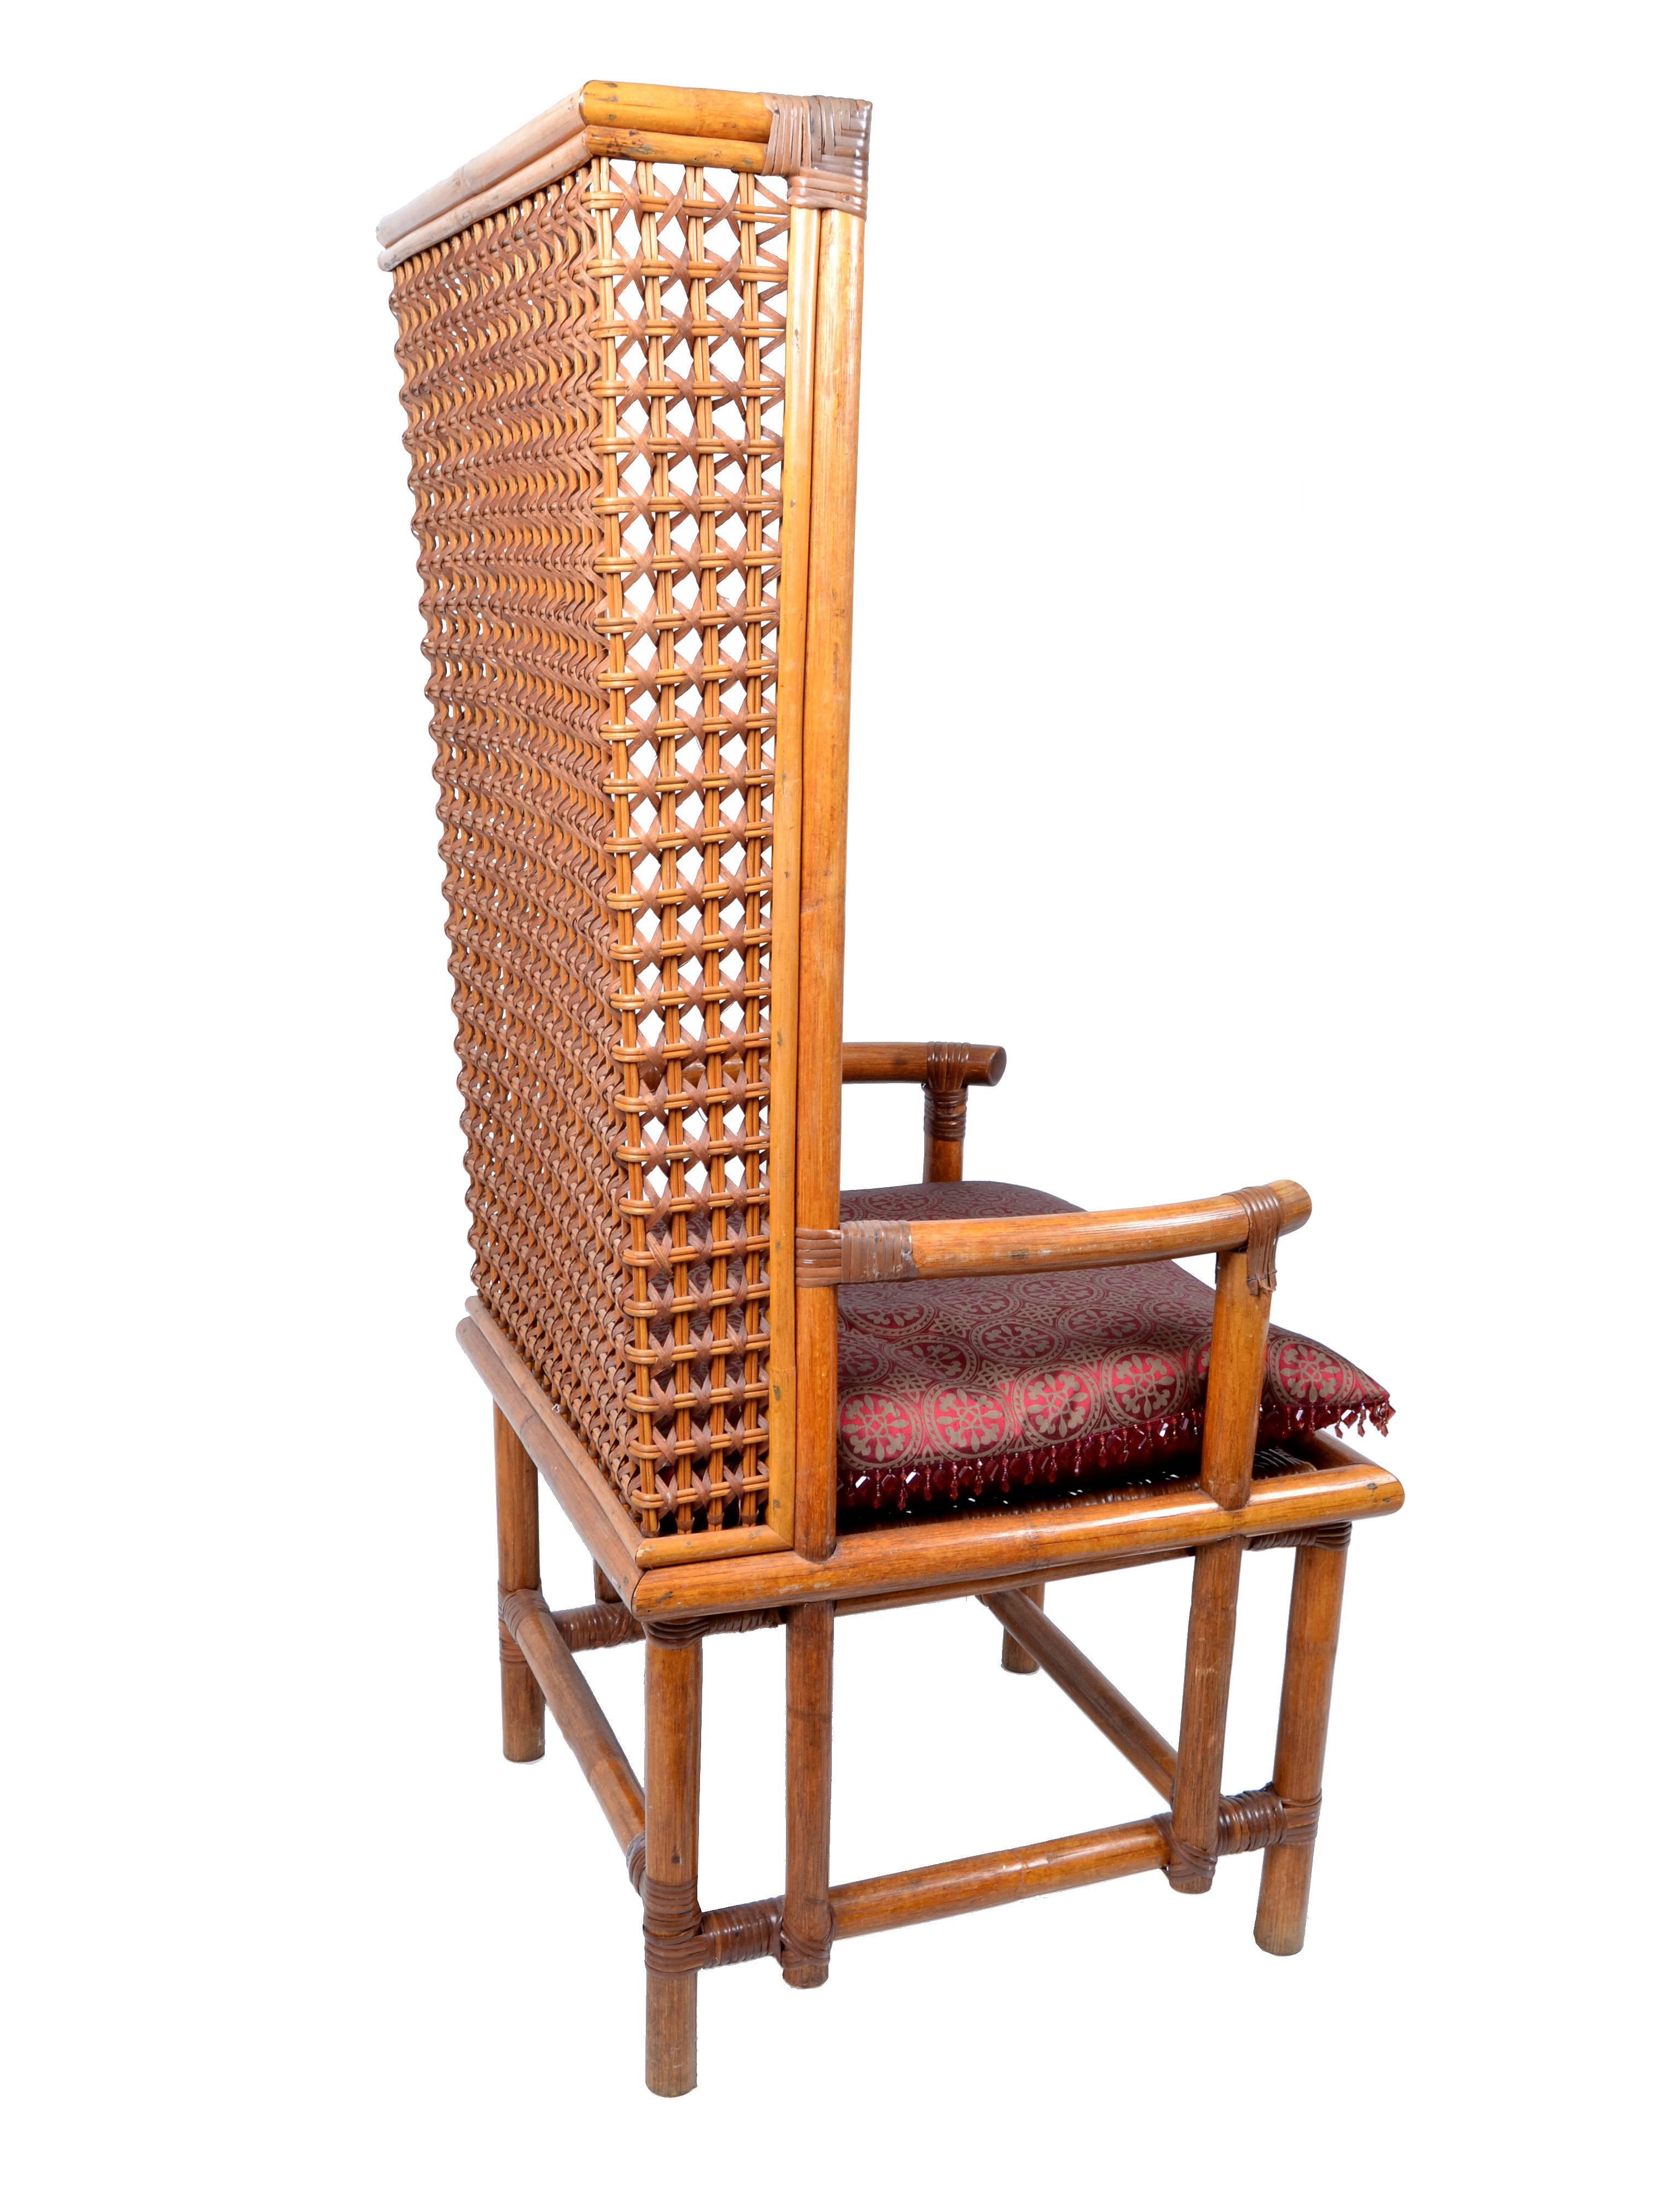 Post-Modern Vintage Bamboo and Cane Chinese Chinoiserie Style High Back Chair